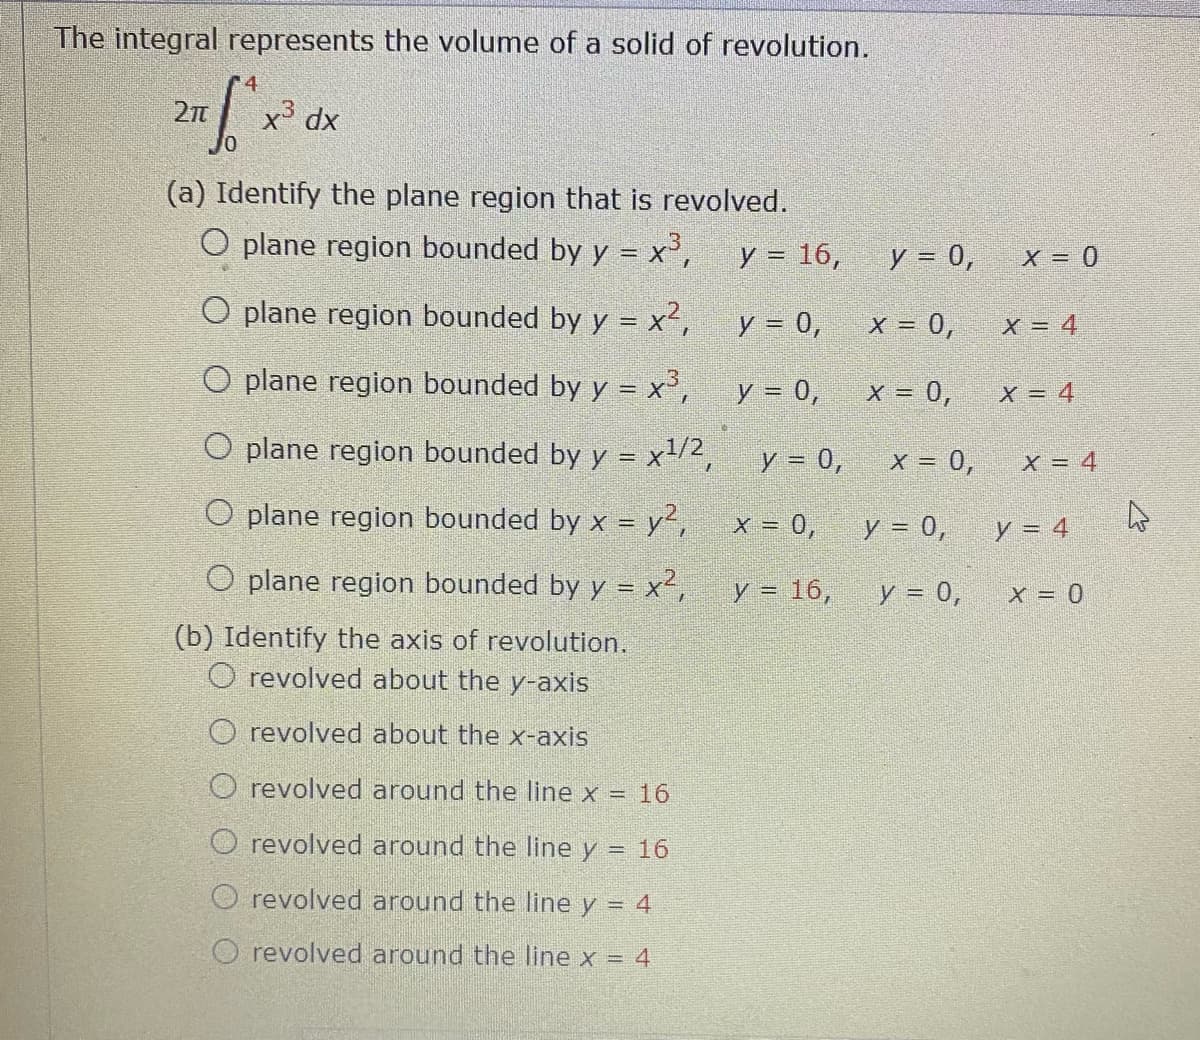 The integral represents the volume of a solid of revolution.
r4
27
x' dx
(a) Identify the plane region that is revolved.
O plane region bounded by y = x°,
y = 16,
y = 0,
X = 0
O plane region bounded by y = x²,
y = 0,
X = 0,
O plane region bounded by y = x°,
y = 0,
x = 0,
X = 4
O plane region bounded by y = x1/2,
y = 0,
X = 4
O plane region bounded by x = y²,
x = 0,
y = 0,
y = 4
O plane region bounded by y = x²,
y = 16,
y = 0,
X = 0
(b) Identify the axis of revolution.
O revolved about the y-axis
O revolved about the x-axis
O revolved around the line x = 16
O revolved around the line y = 16
revolved around the line y = 4
O revolved around the line x = 4
